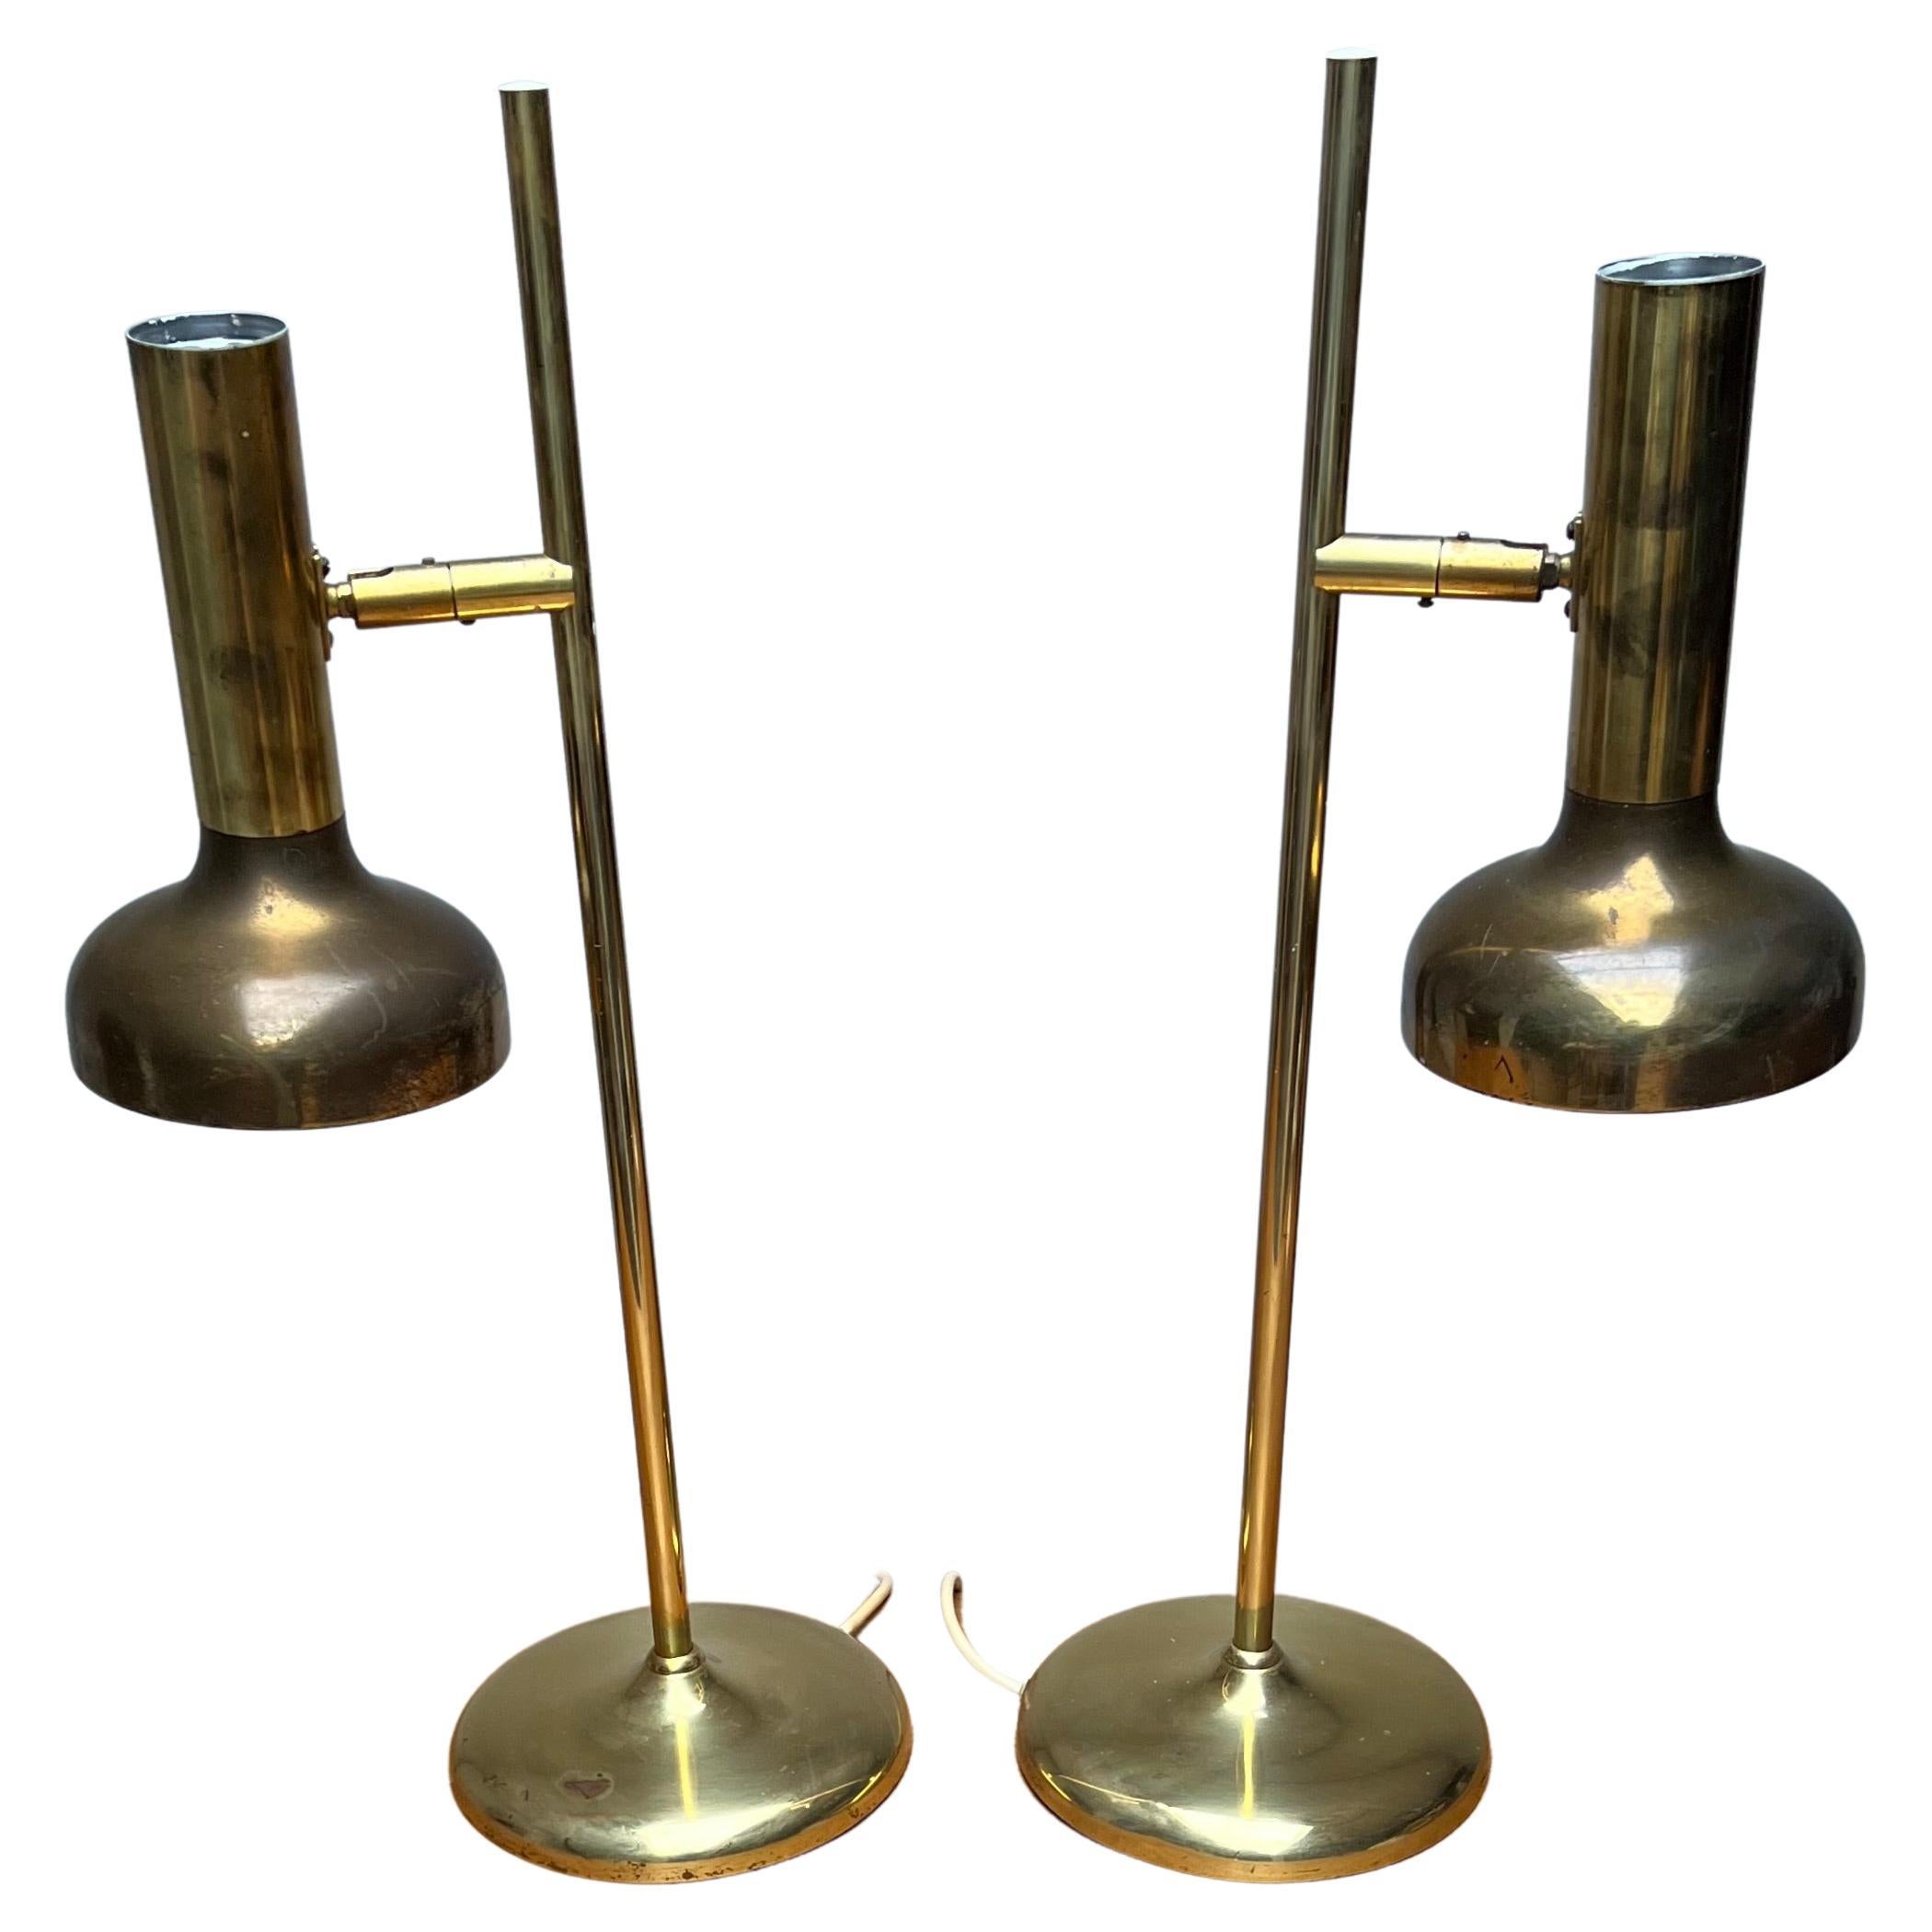 Stunning and highly decorative pair of brass table lamps made by Koch and Lowy for OMI. 

If you are looking for a truly stylish and rare pair of midcentury design table lamps to grace your office or living space then this listing could be the one